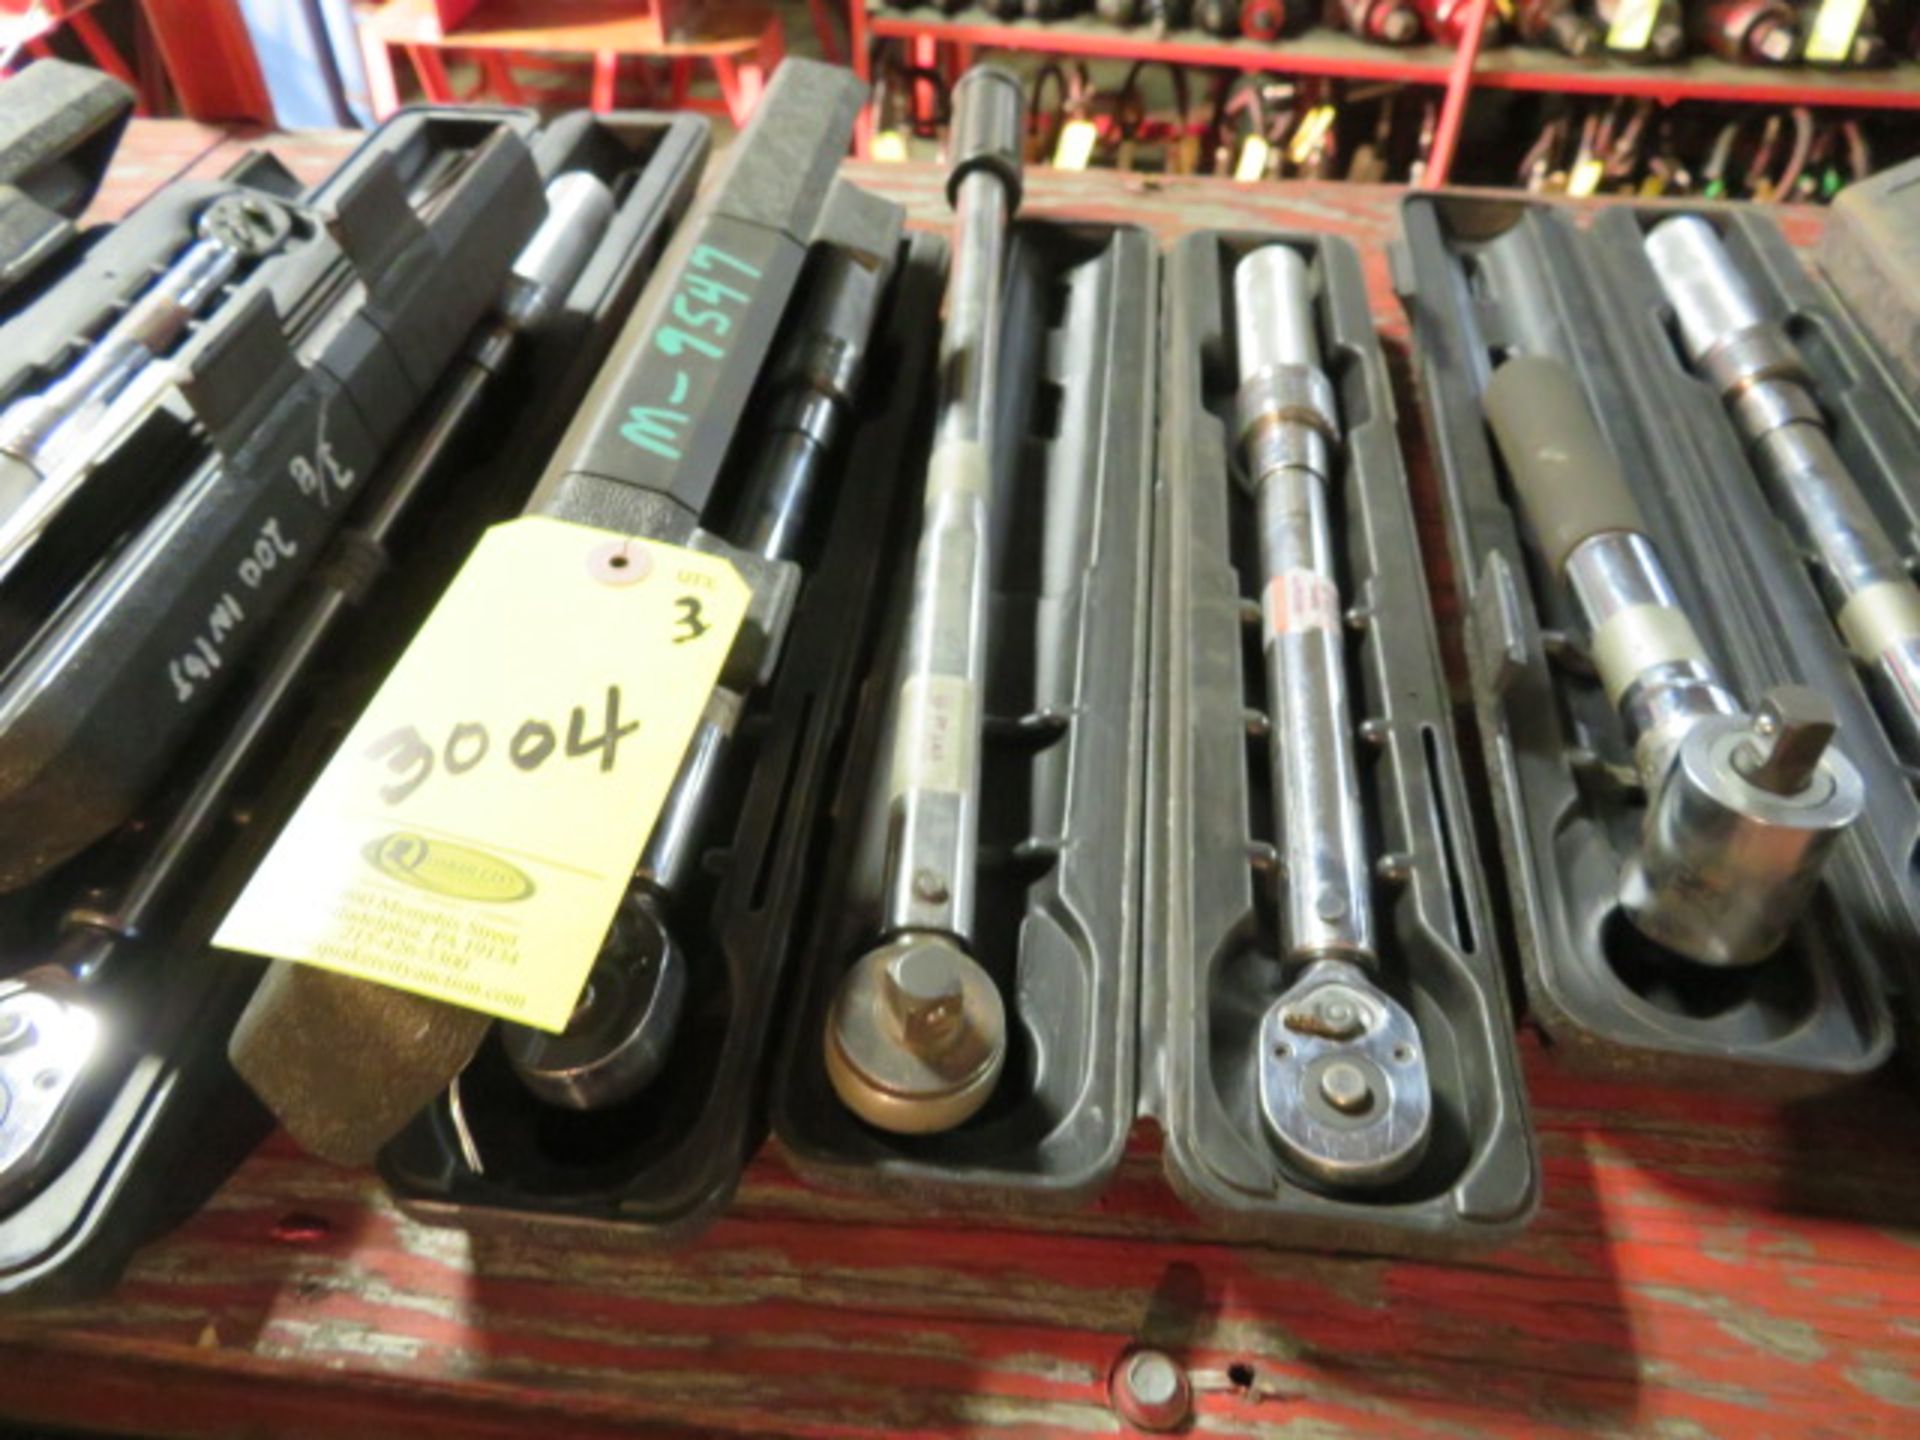 (3) WRIGHT TORQUE WRENCHES 2- 3/8" AND 1- 1/2"